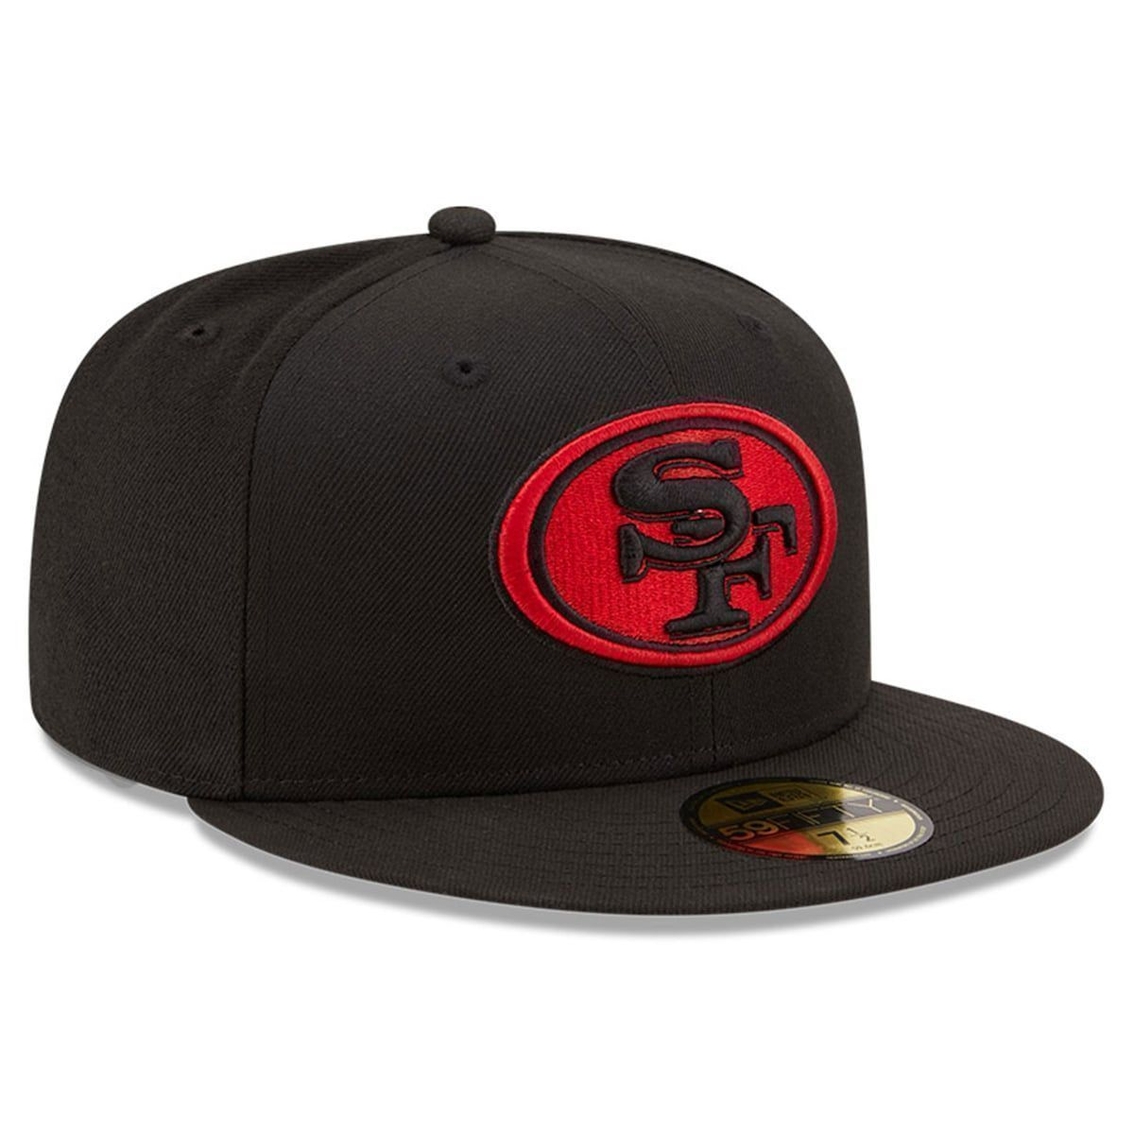 New Era Men's Black San Francisco 49ers Team 59FIFTY Fitted Hat - Image 4 of 4